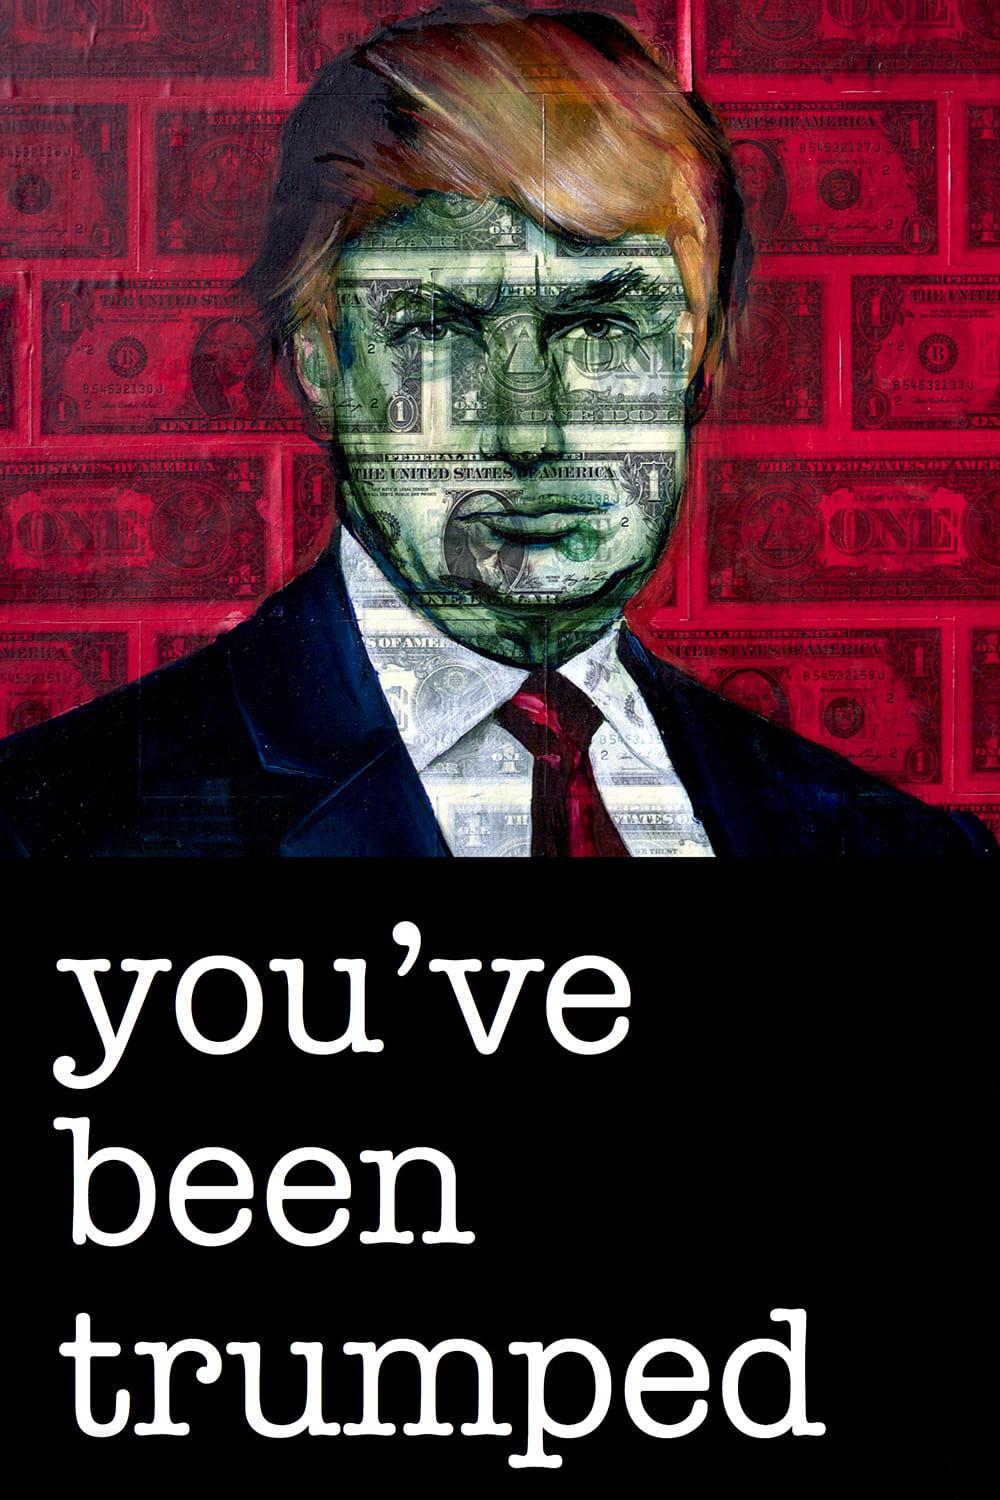 You've Been Trumped poster